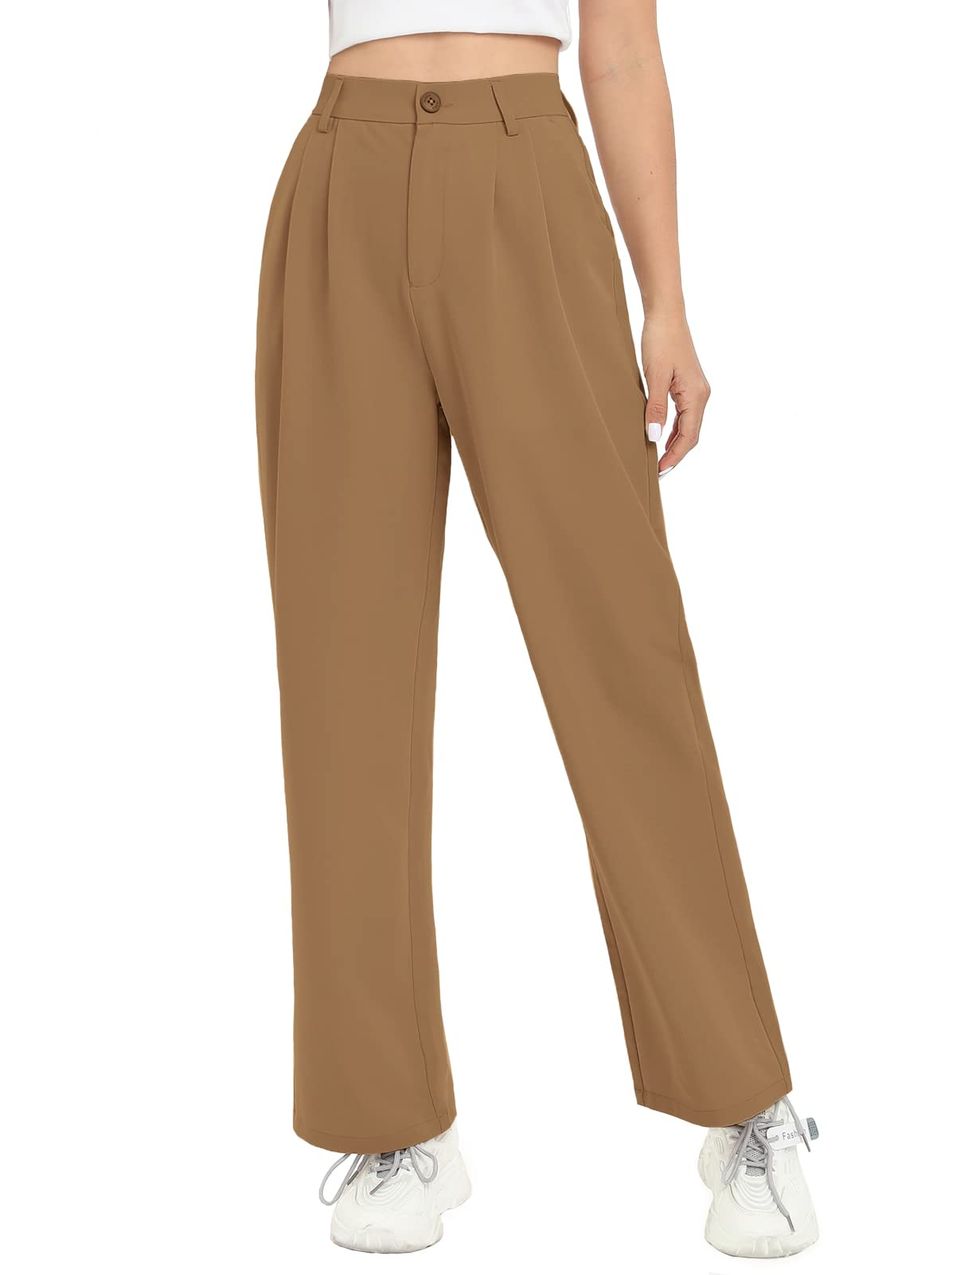 Socialite Thin Lounge Pants Womens S Small Soft Camel Wide Leg Stretch High  Rise